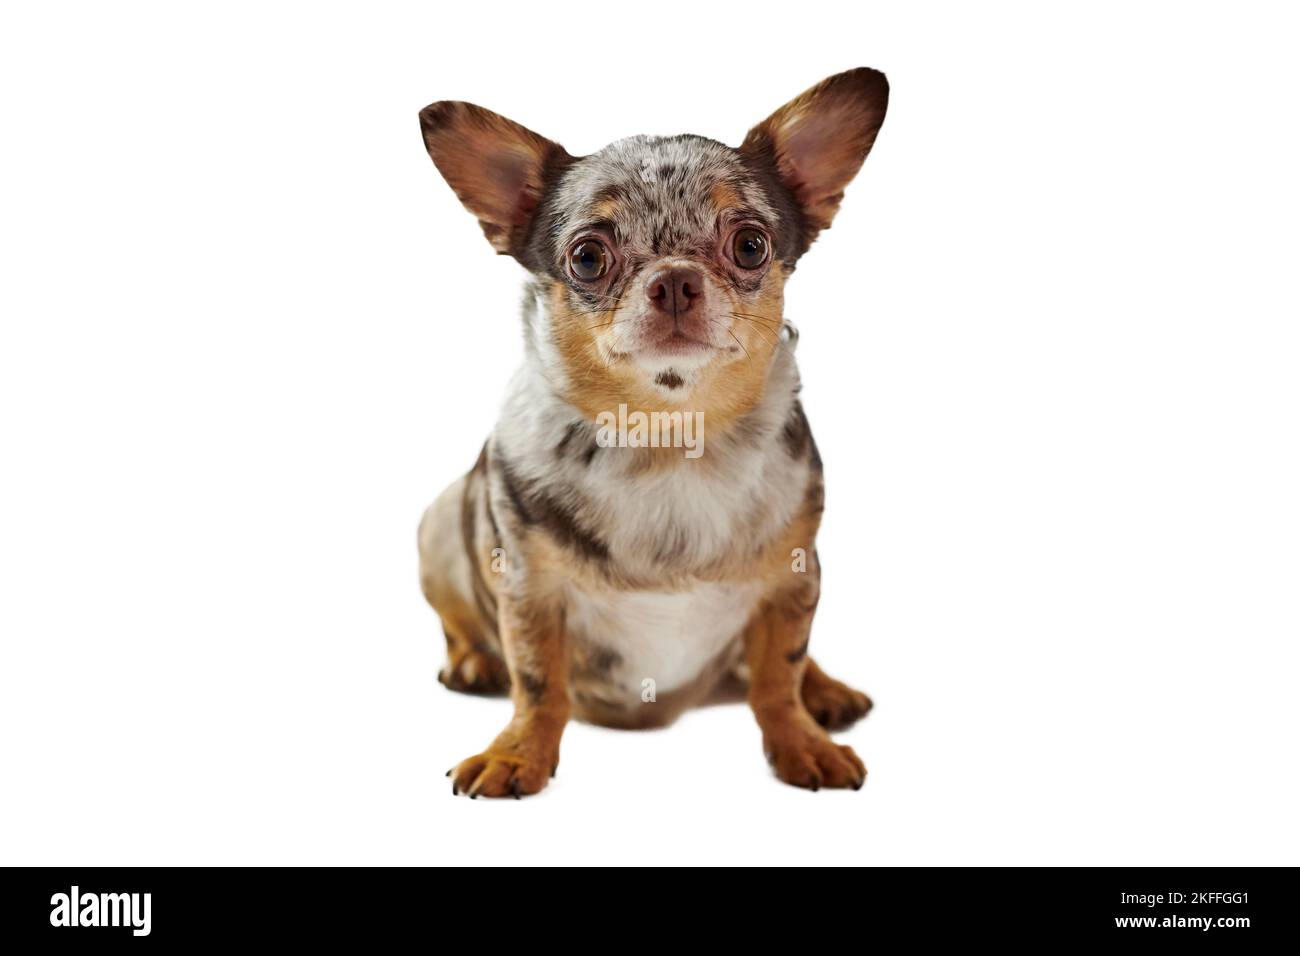 Fat pregnant short haired chihuahua dog with big ears isolated on white background, cute adorable little chihuahua dog. Funny brown pregnant chihuahua Stock Photo